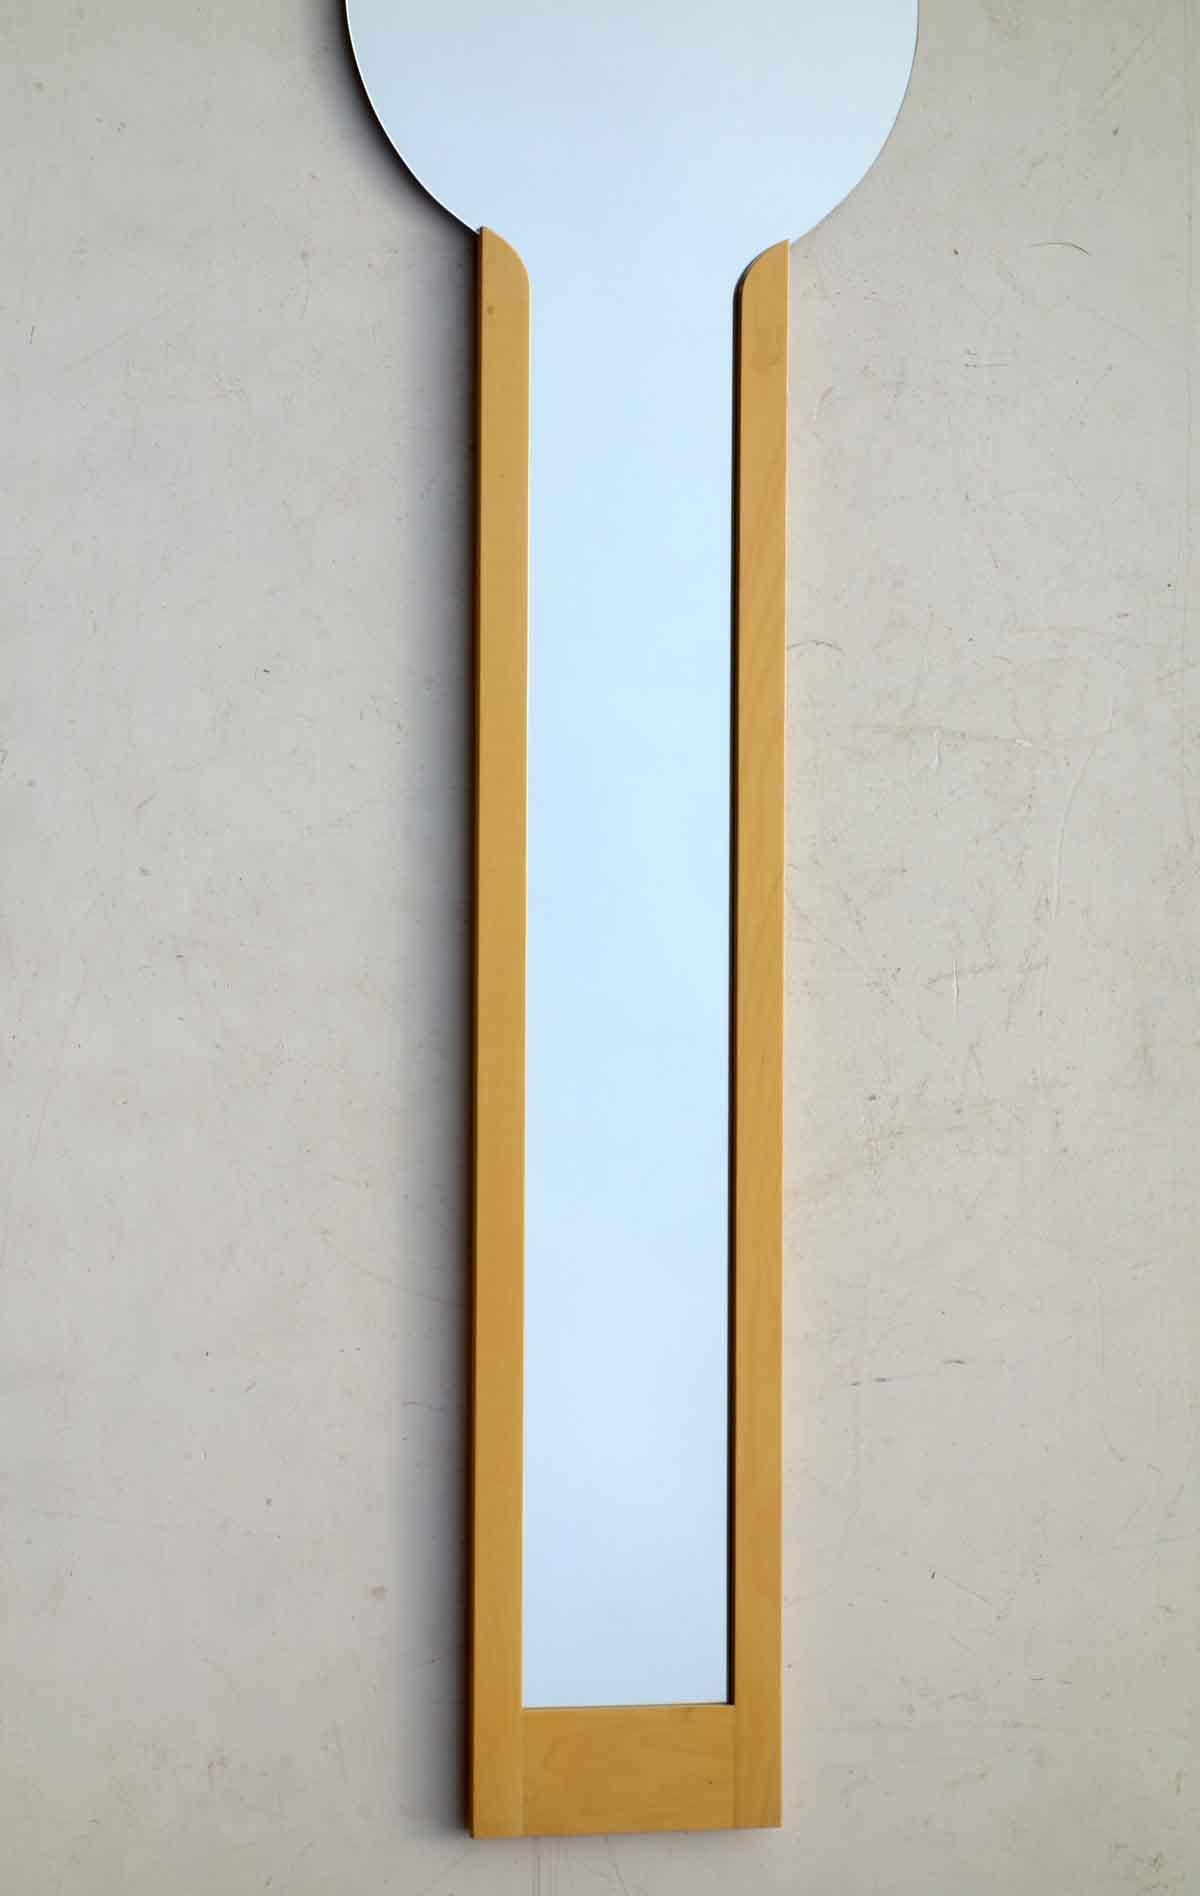 Wall Mirror
Italy, 1980

Wood frame
Glass in perfect condiction